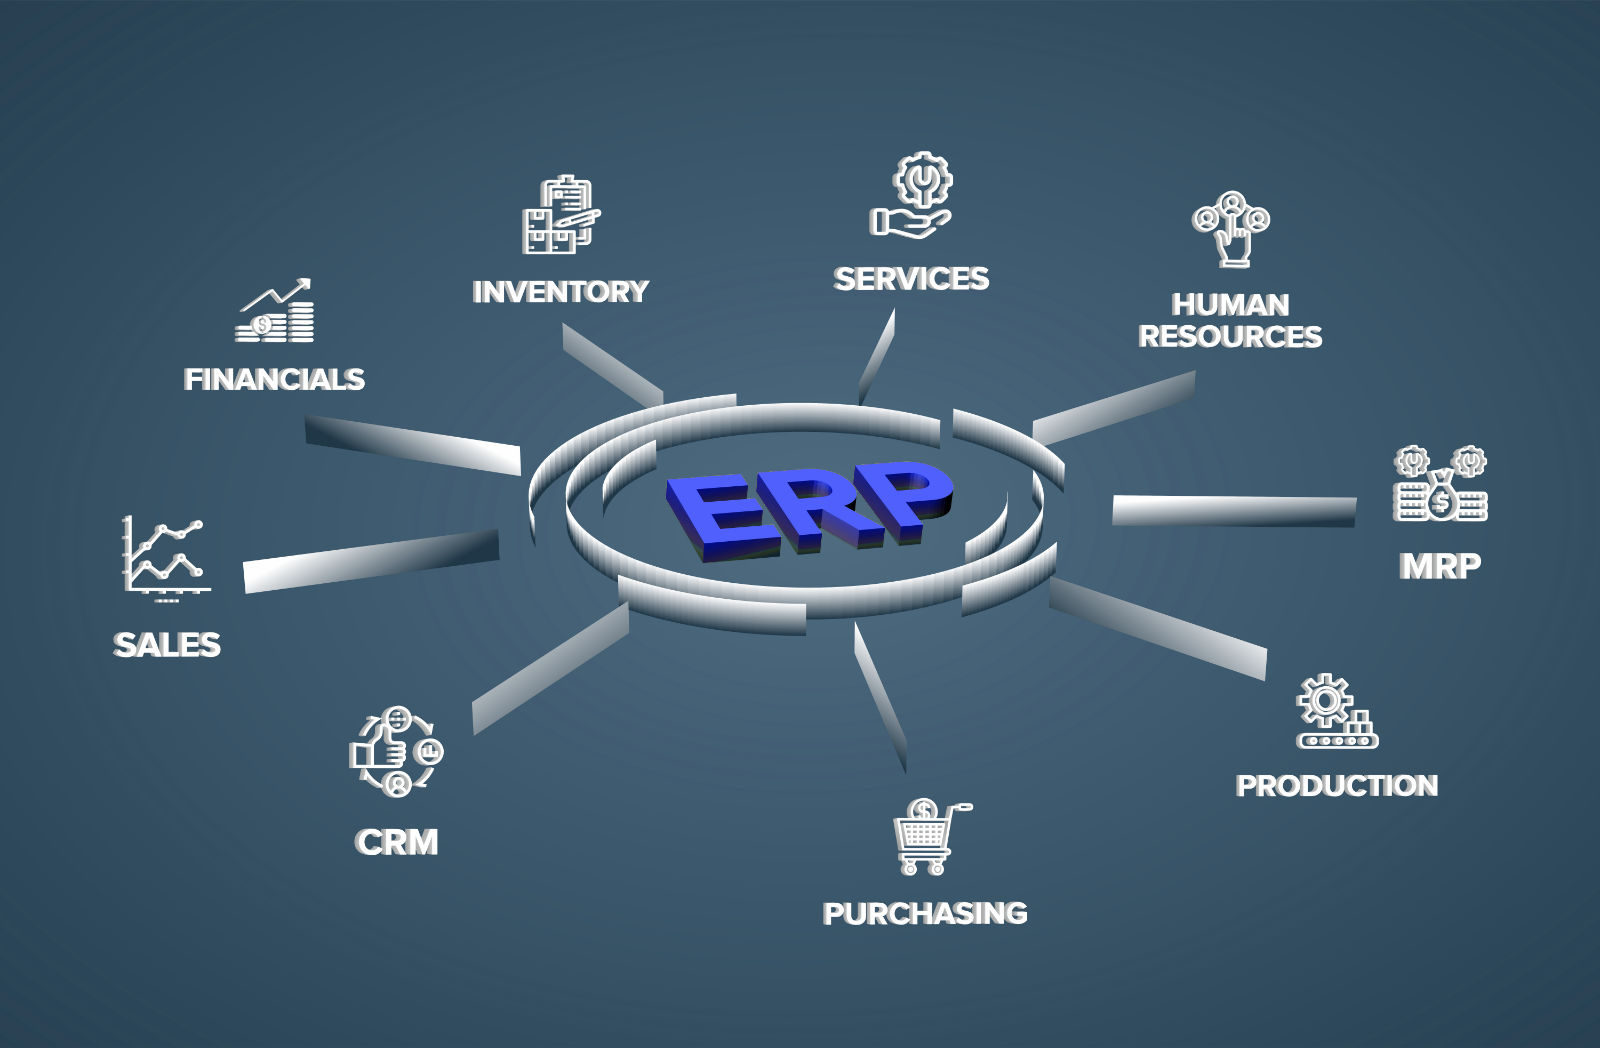 MRO Enterprise resource planning (ERP) for aircraft and aviation